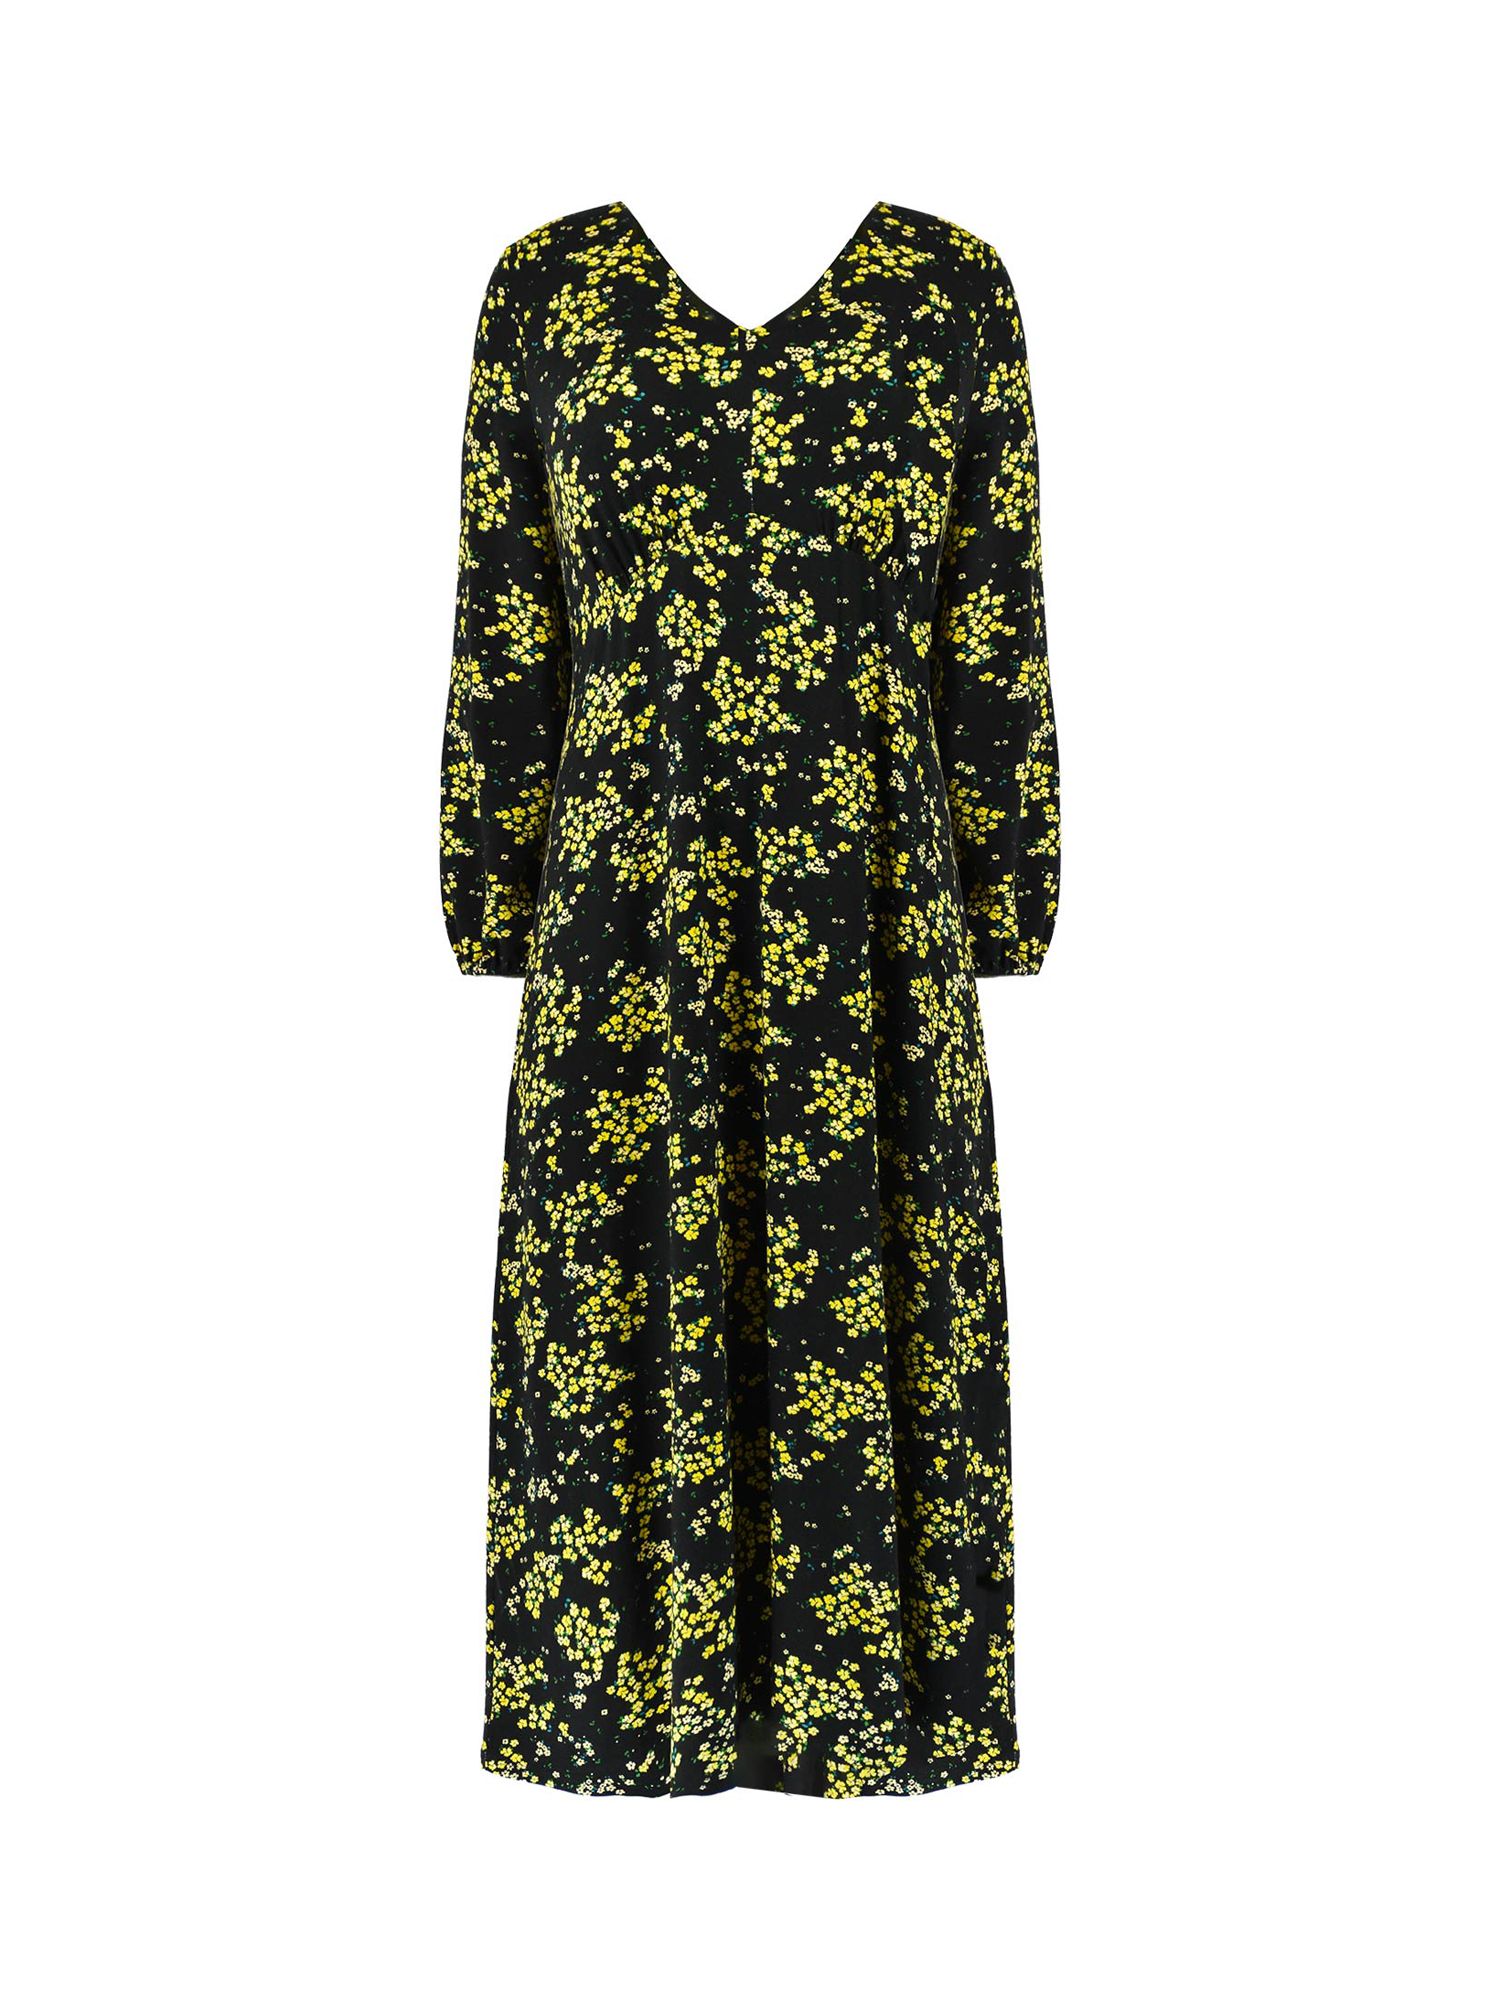 Buy Live Unlimited Curve Ditsy Floral Print Gathered Midi Dress, Yellow/Black Online at johnlewis.com